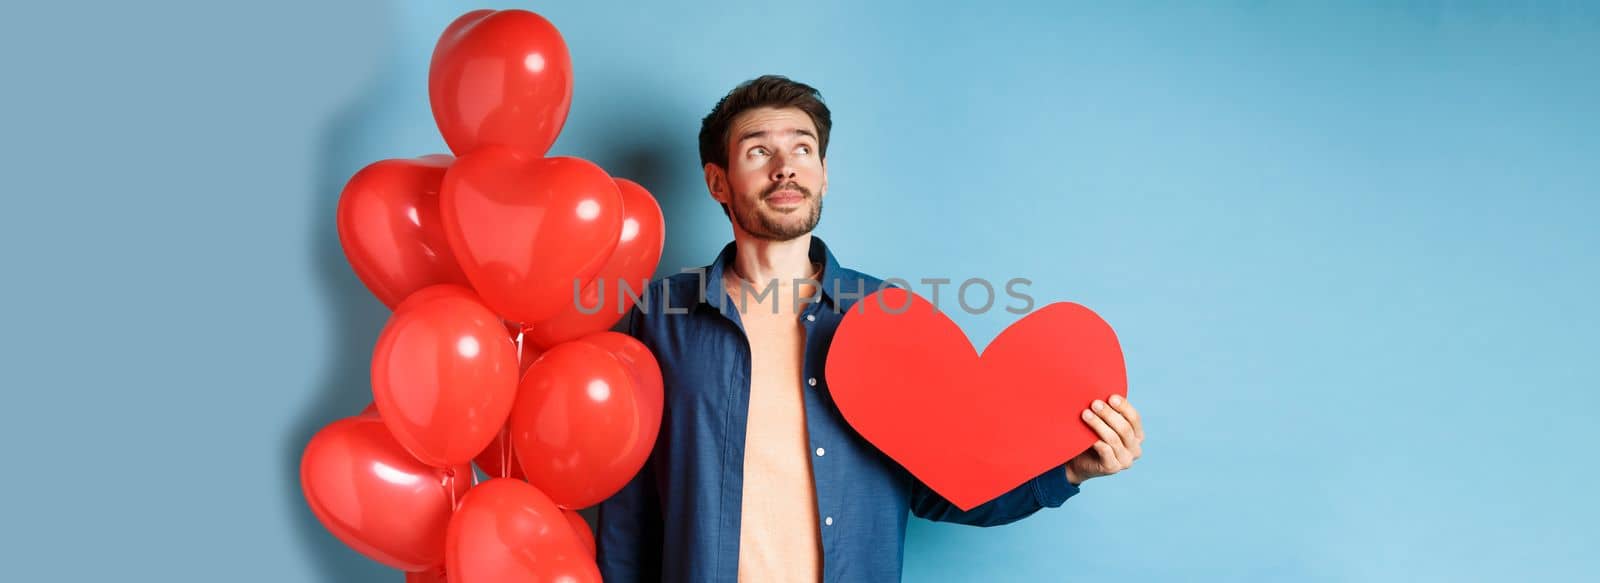 Valentines day and love concept. Man dreaming of soulmate, holding big red heart cutout and balloons, standing over blue background.